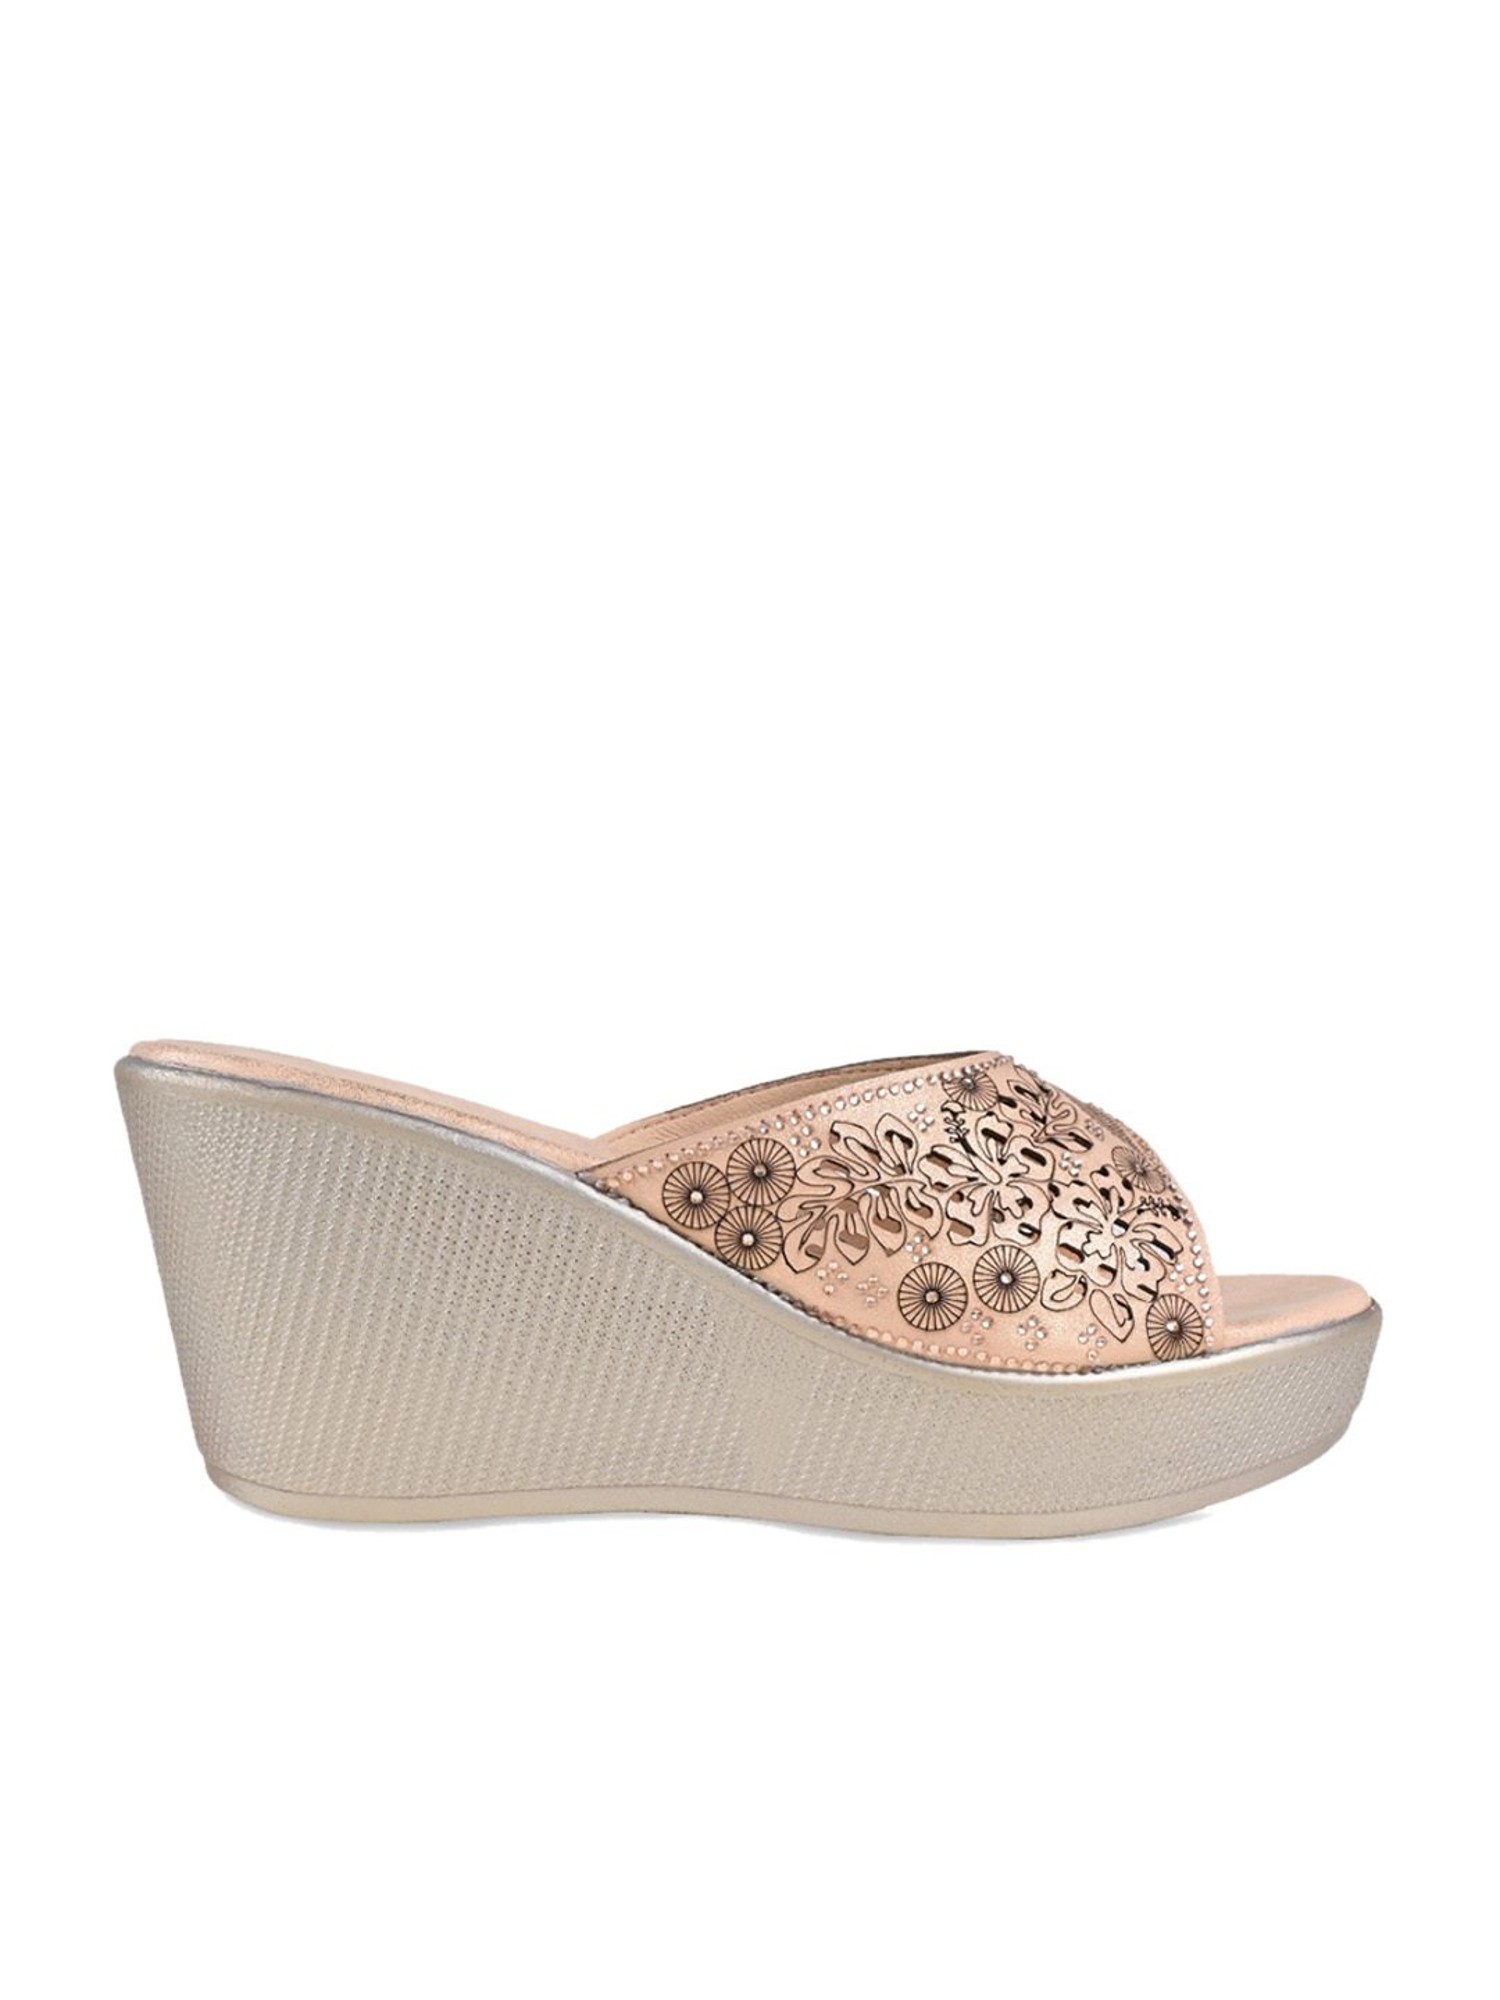 Buy Champagne Women's Wedges - The Meteor Champagne | Tresmode